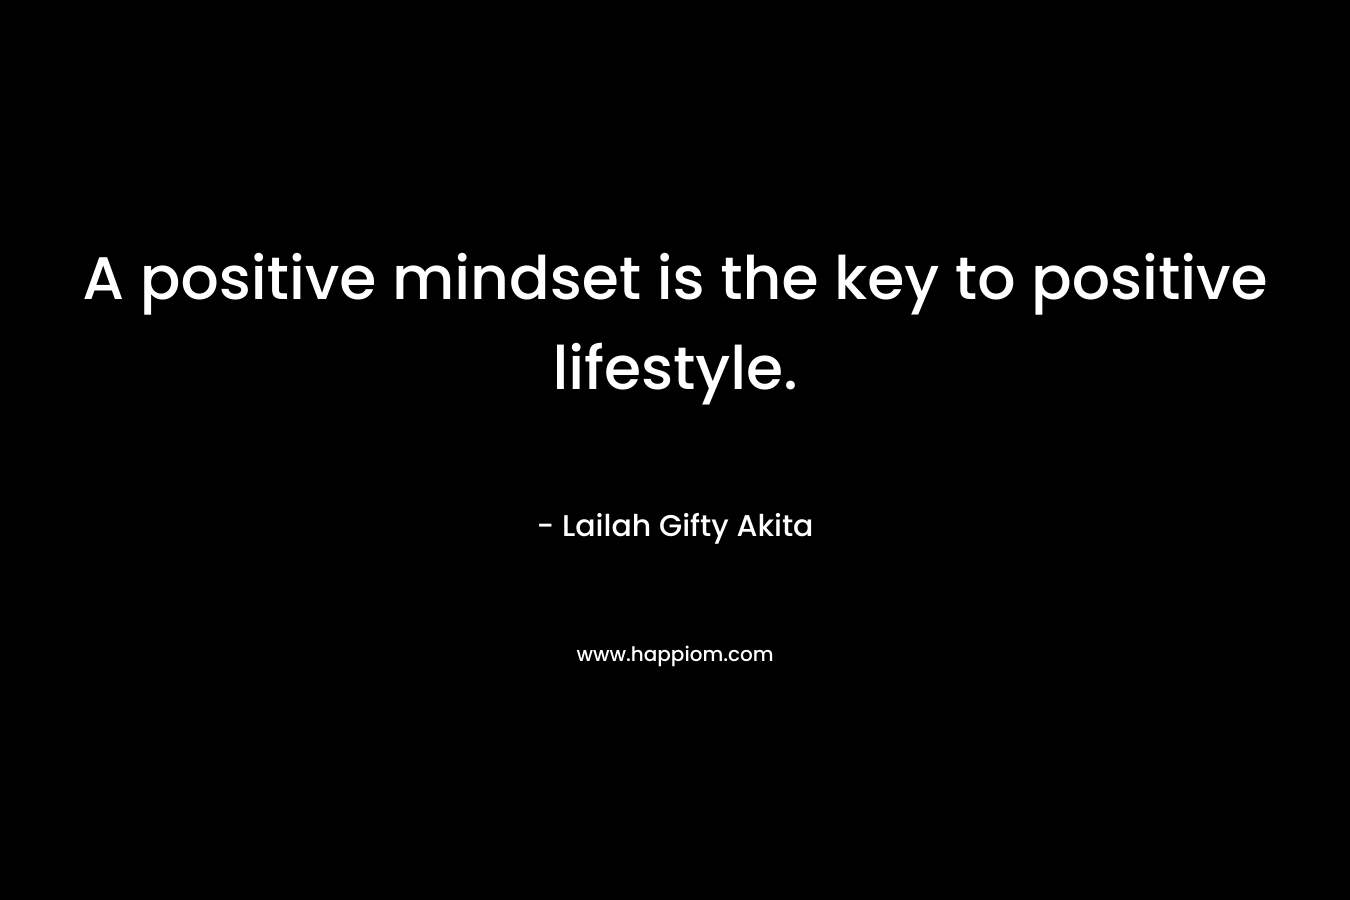 A positive mindset is the key to positive lifestyle.